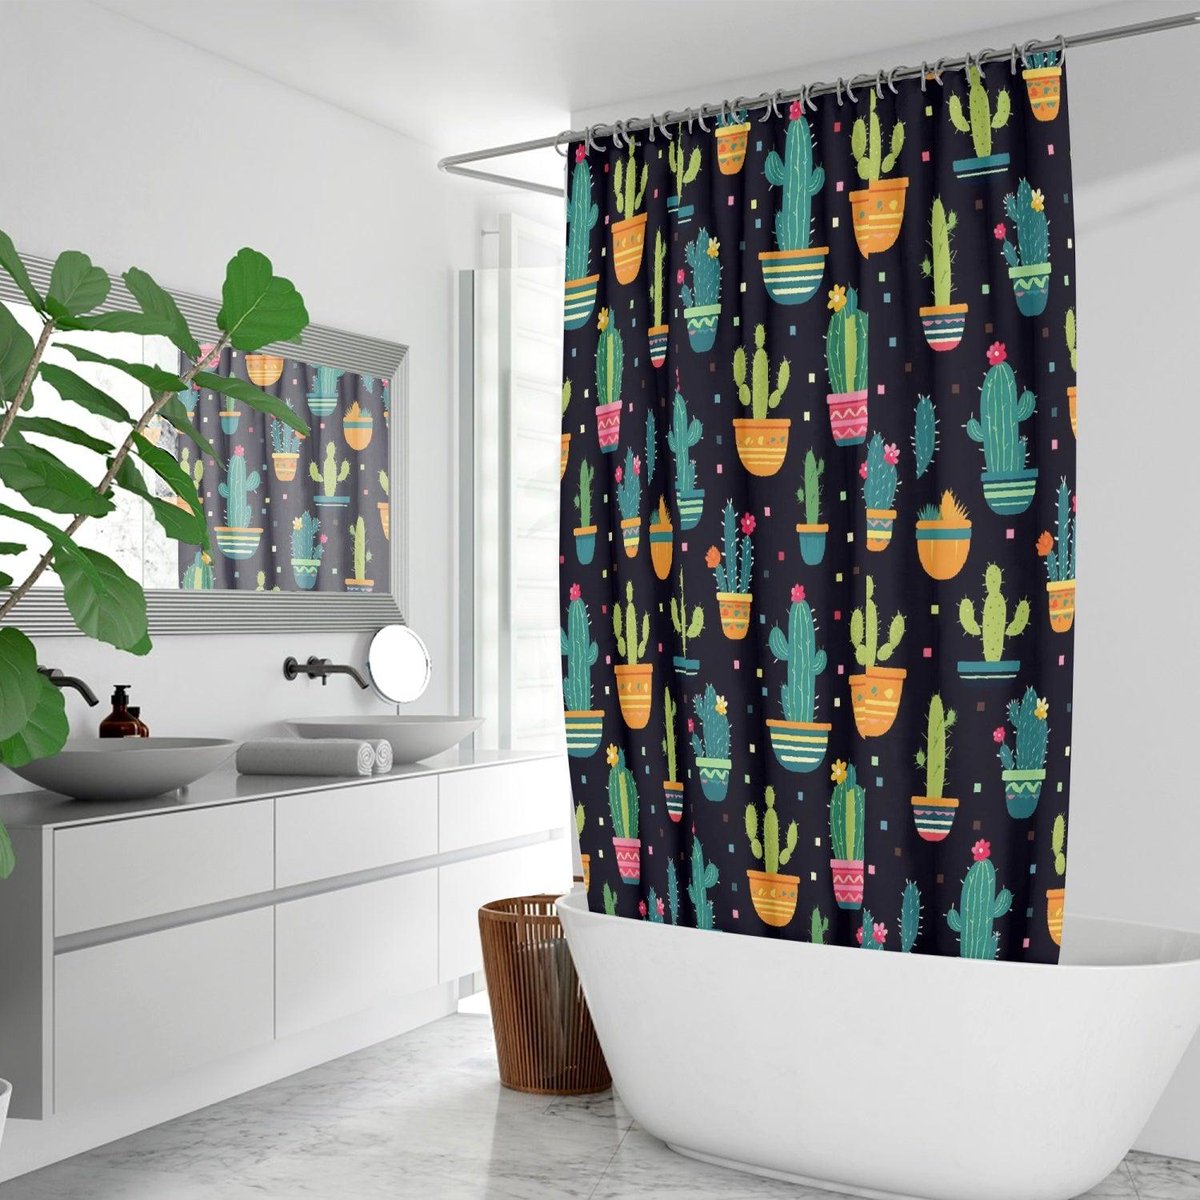 Shower yourself with style Cactus Succulent Shower Curtain 🌸🚿 Click the bio link to shop our exclusive designs!#BathroomDecor #BathroomMakeover #ShowerCurtains #BathTime #BathroomStyle #BathroomDetails #LuxuryBathroom #BathroomInspo #ShowerDecor #WaterproofDecor